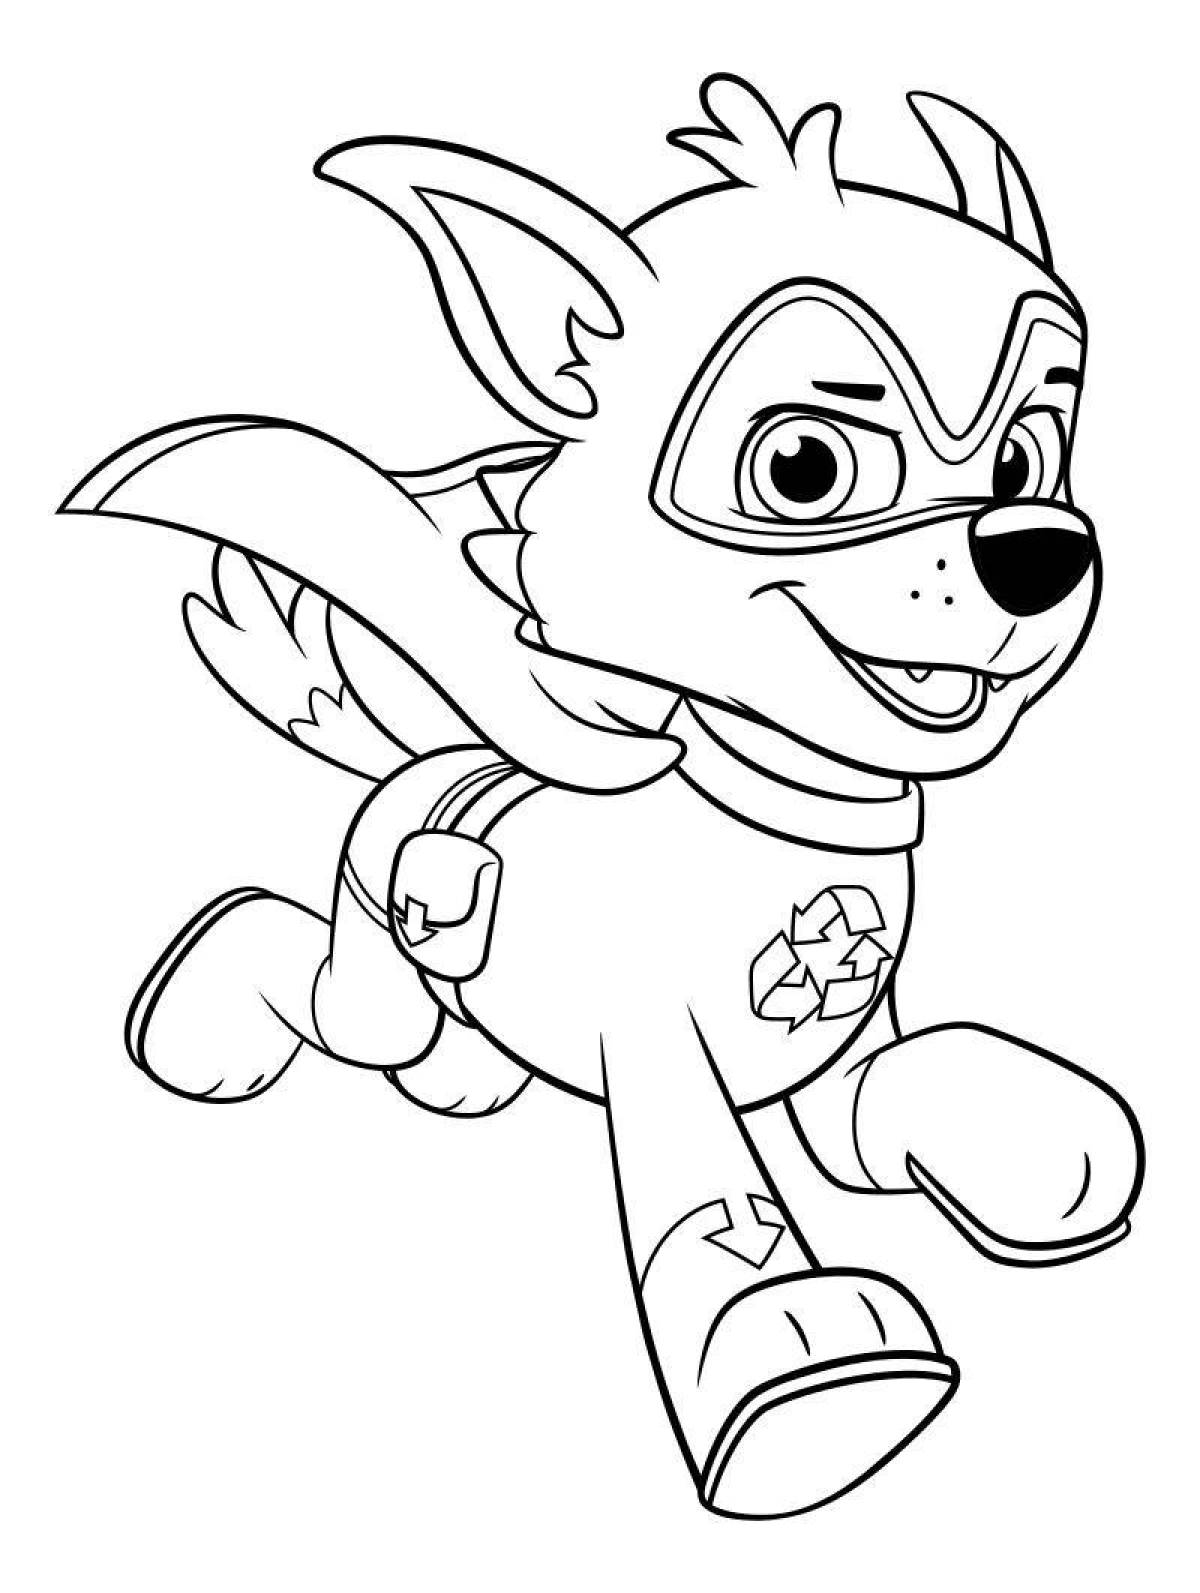 Playful rocky coloring page